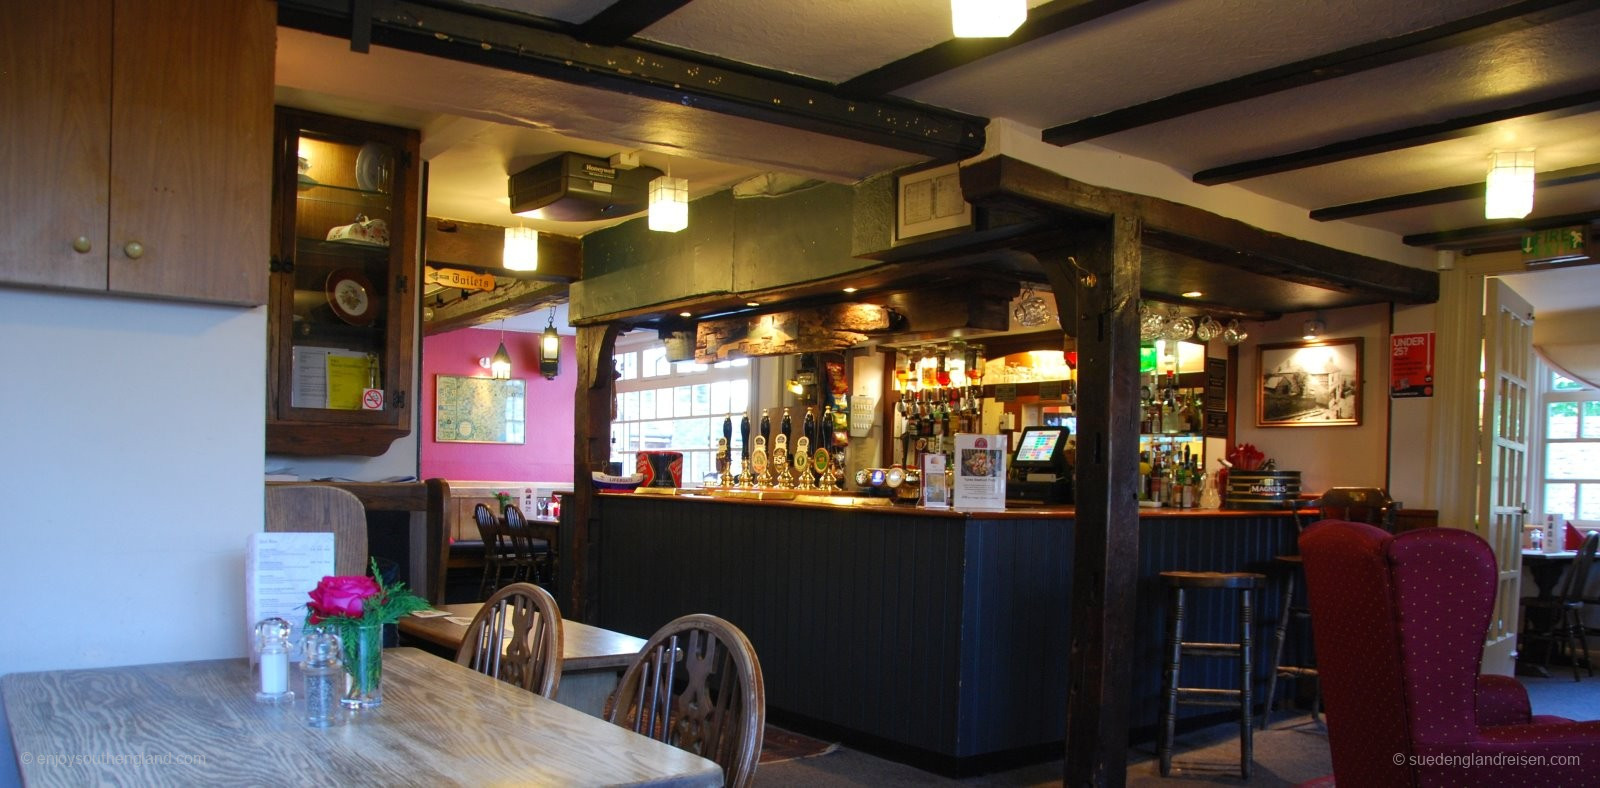 The bar in a typical English pub